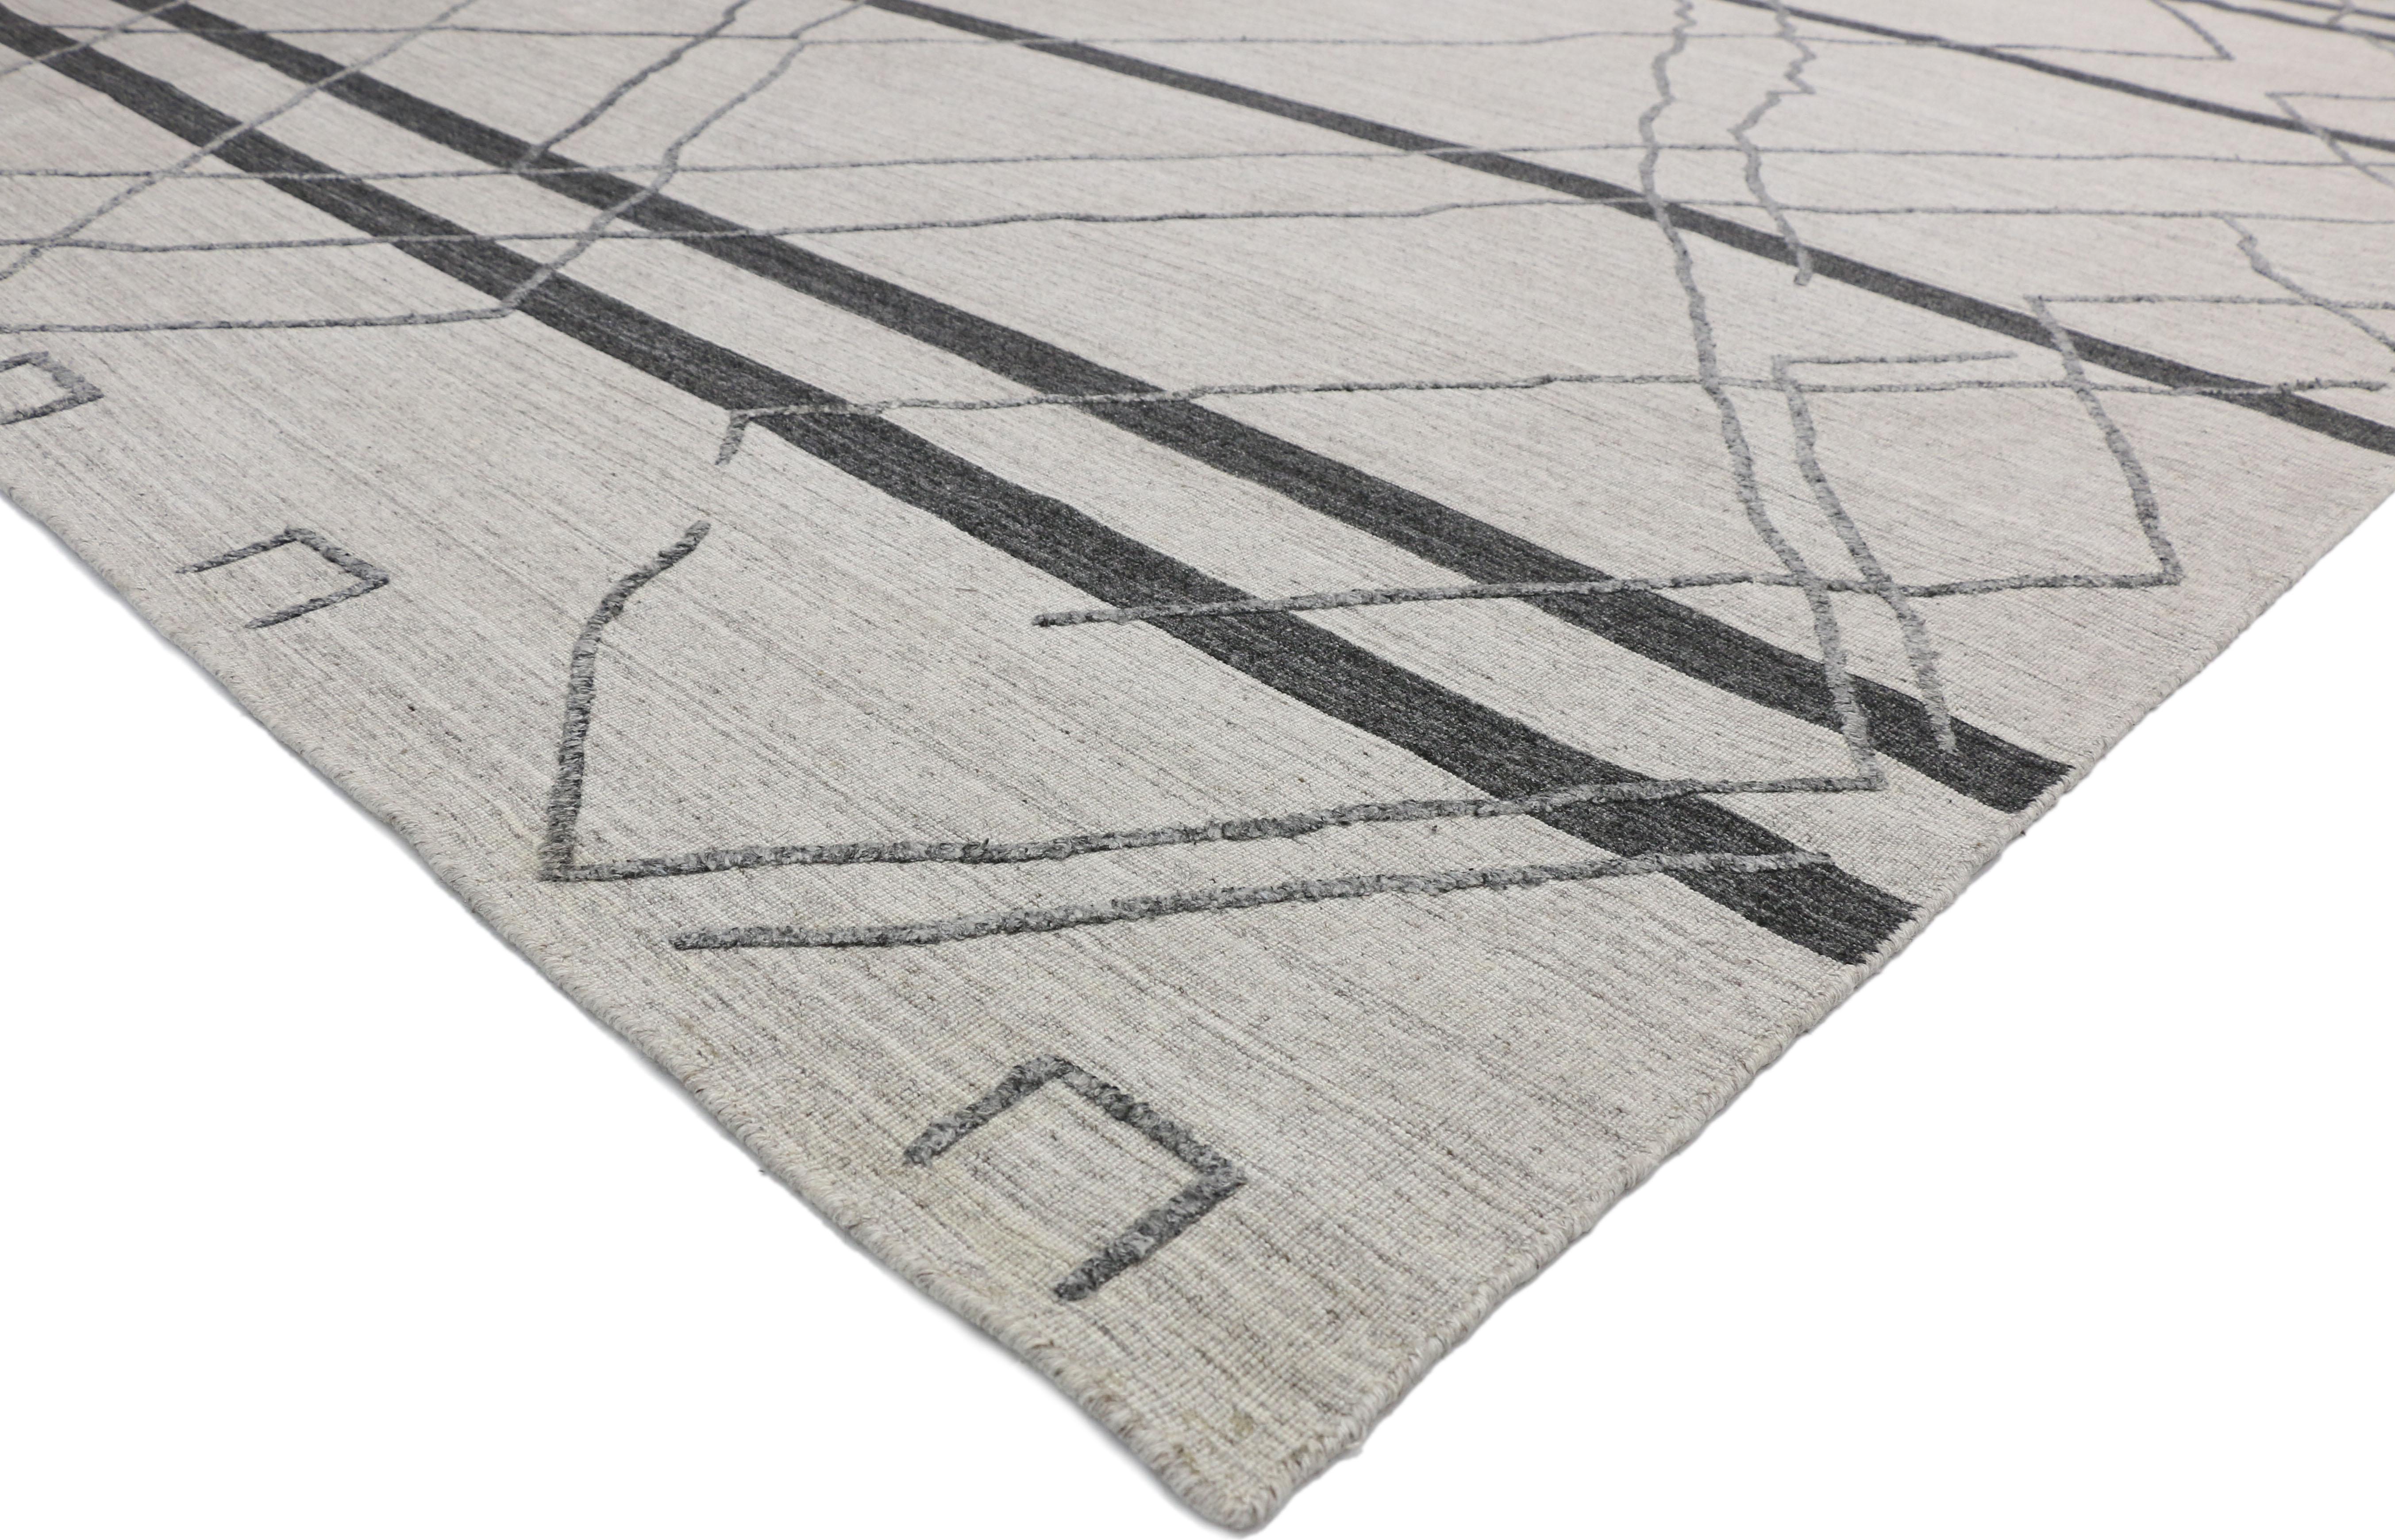 30417, New Gray Modern Textured Rug with Raised Moroccan Trellis Design. Warm Hygge vibes meet tribal designs in this contemporary Moroccan style gray rug. A dynamic fusion of contemporary trends and nomadic tribal traditions, this Moroccan print